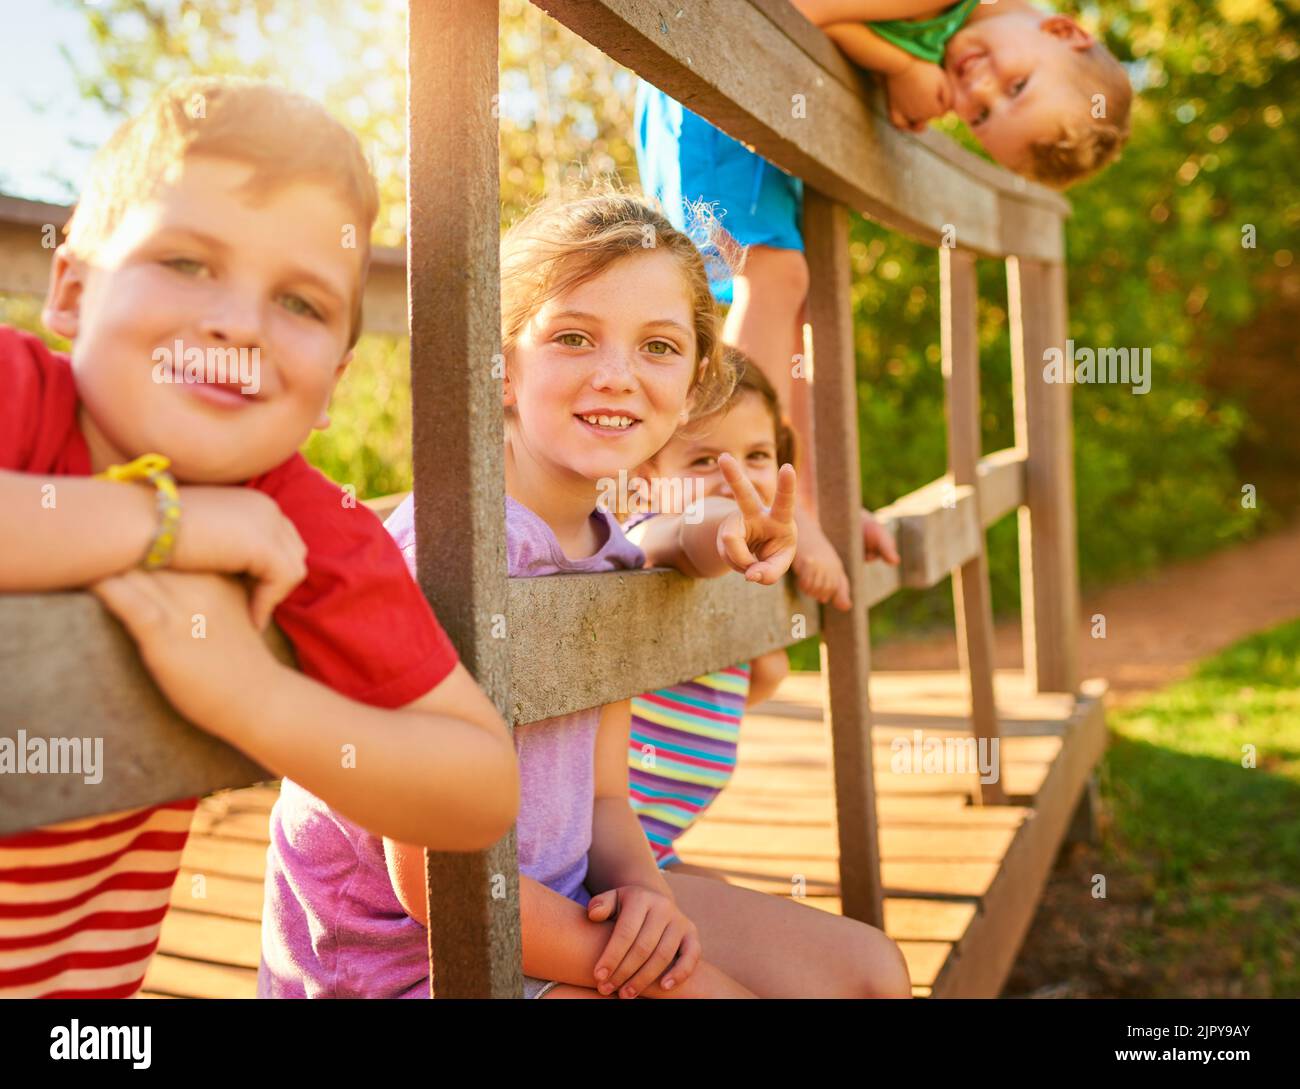 Todays all about having fun. Portrait of a group of little children playing together outdoors. Stock Photo